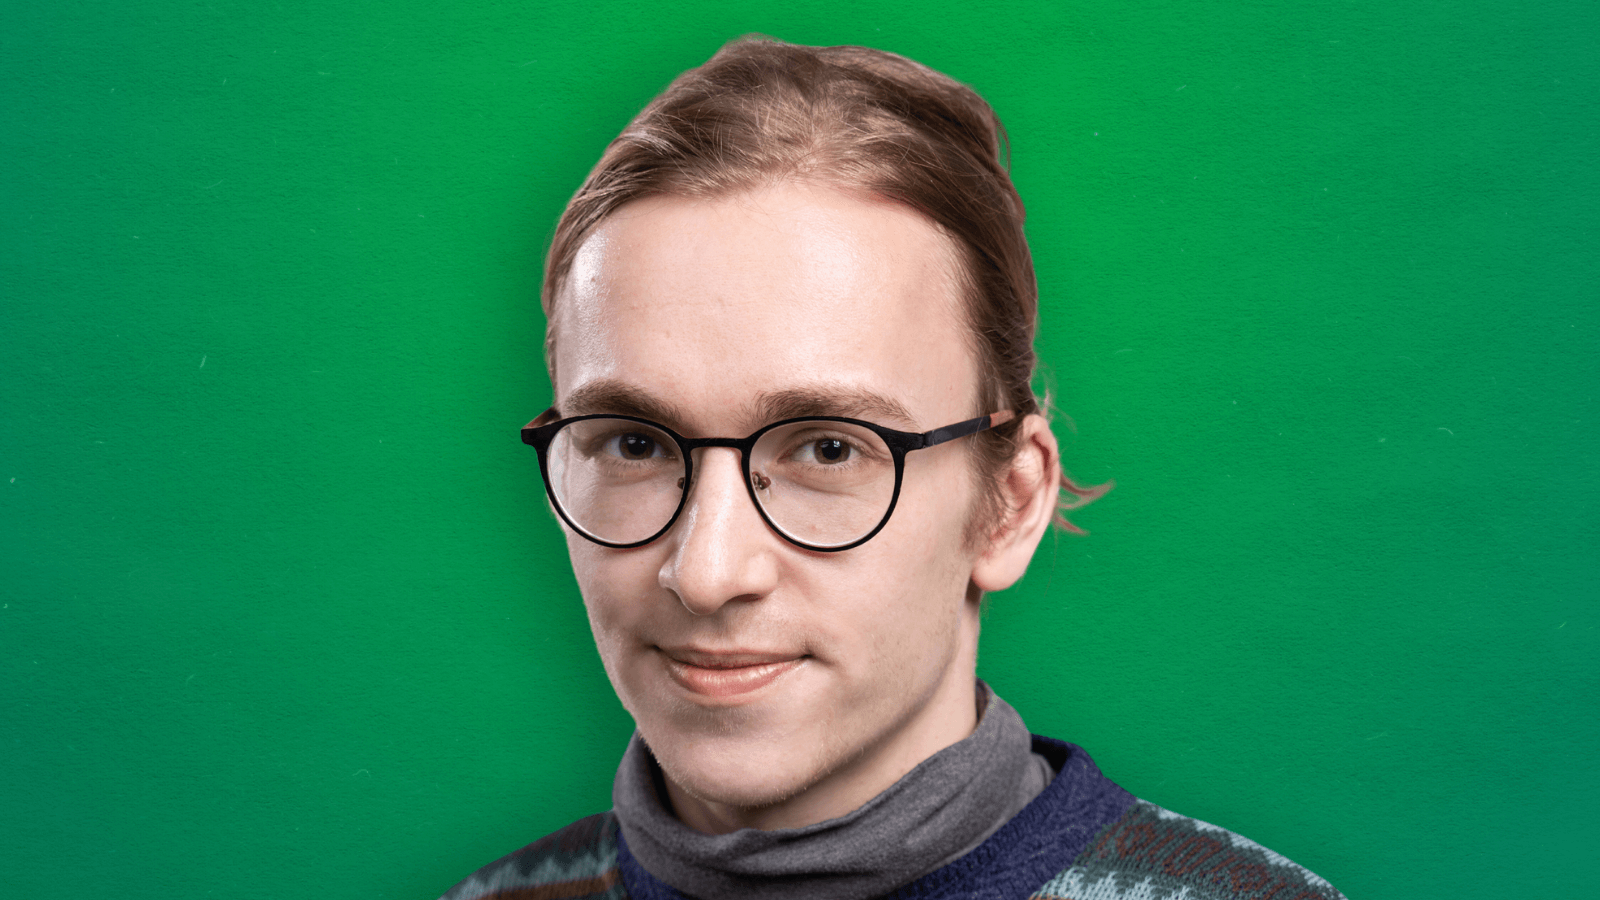 Petr Doubravsky, who co-founded the Czech branch of Greta Thunberg's movement staging school strikes as climate protest, is running in the imminent European Parliament elections for the Zeleni (Green) party. /Zeleni.cz